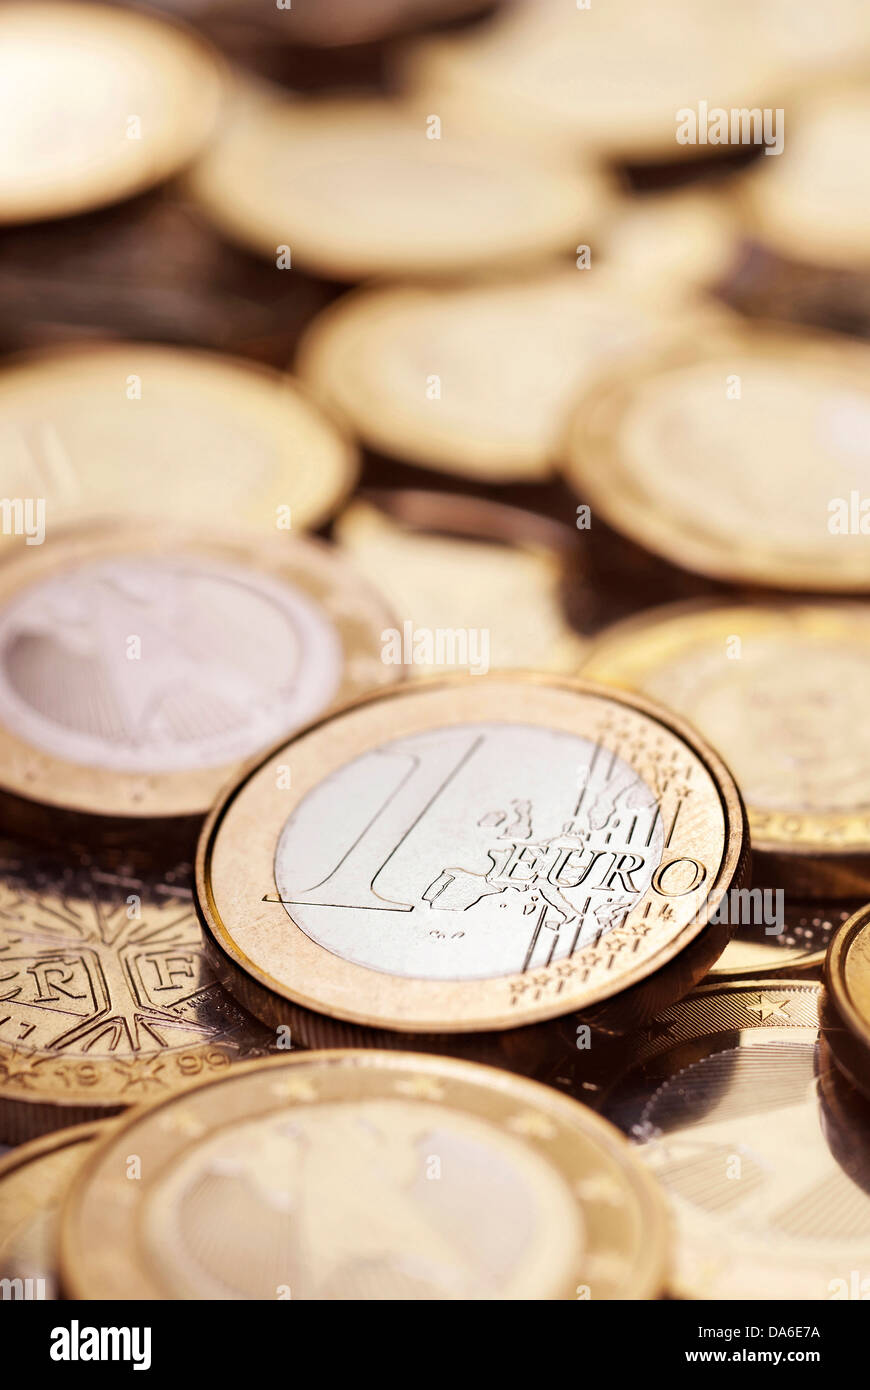 Large number of € coins close up. Stock Photo